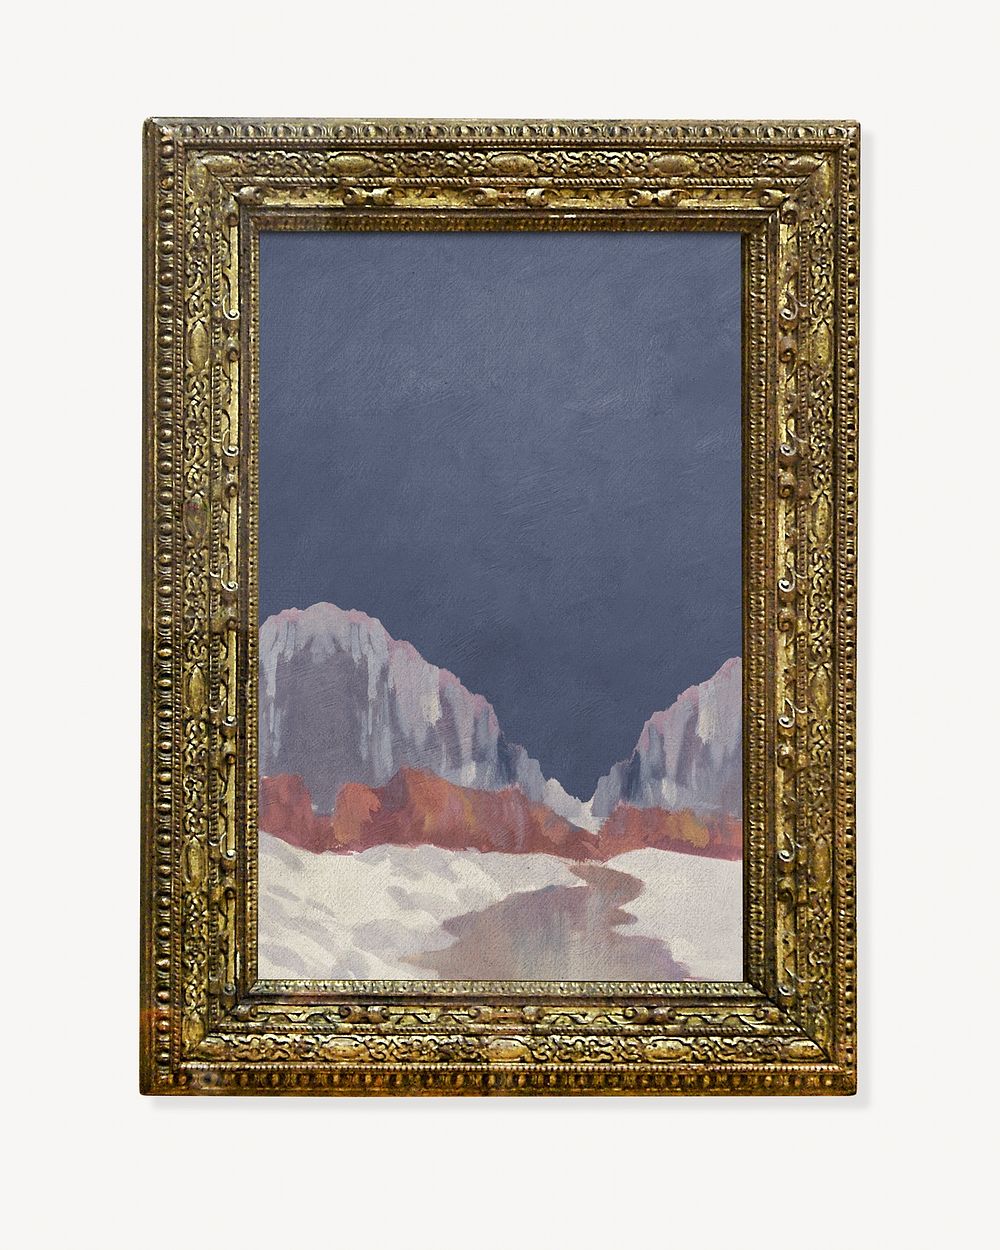 Rock Mountain landscape by Zolo Palugyay framed on a wall. Remixed by rawpixel.